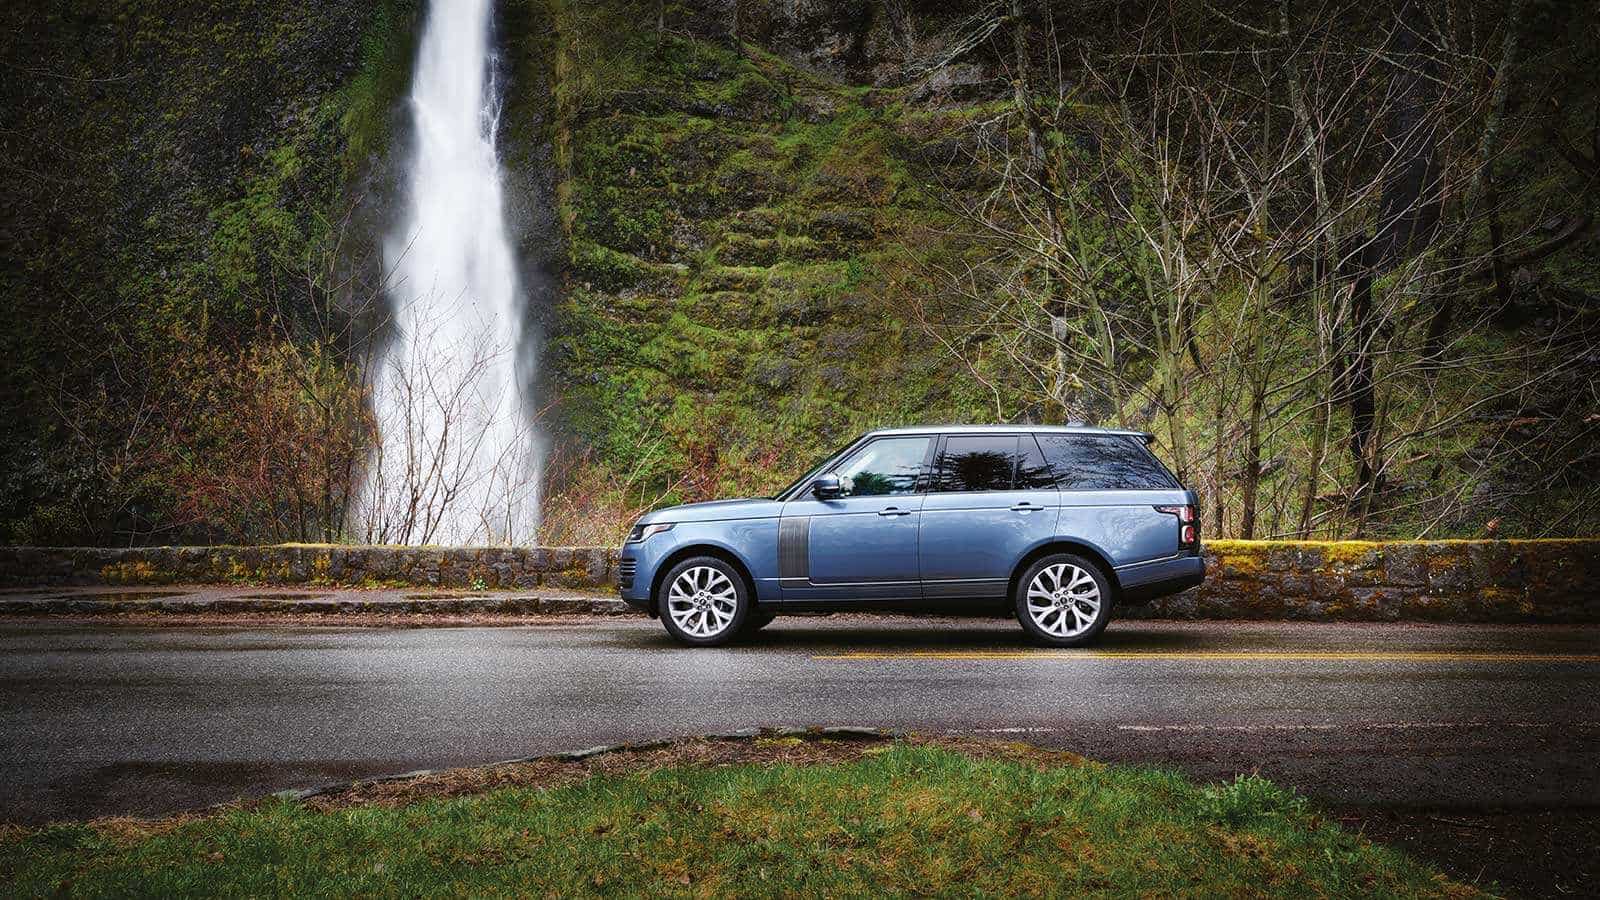 Range Rover HSE parked next to a waterfall